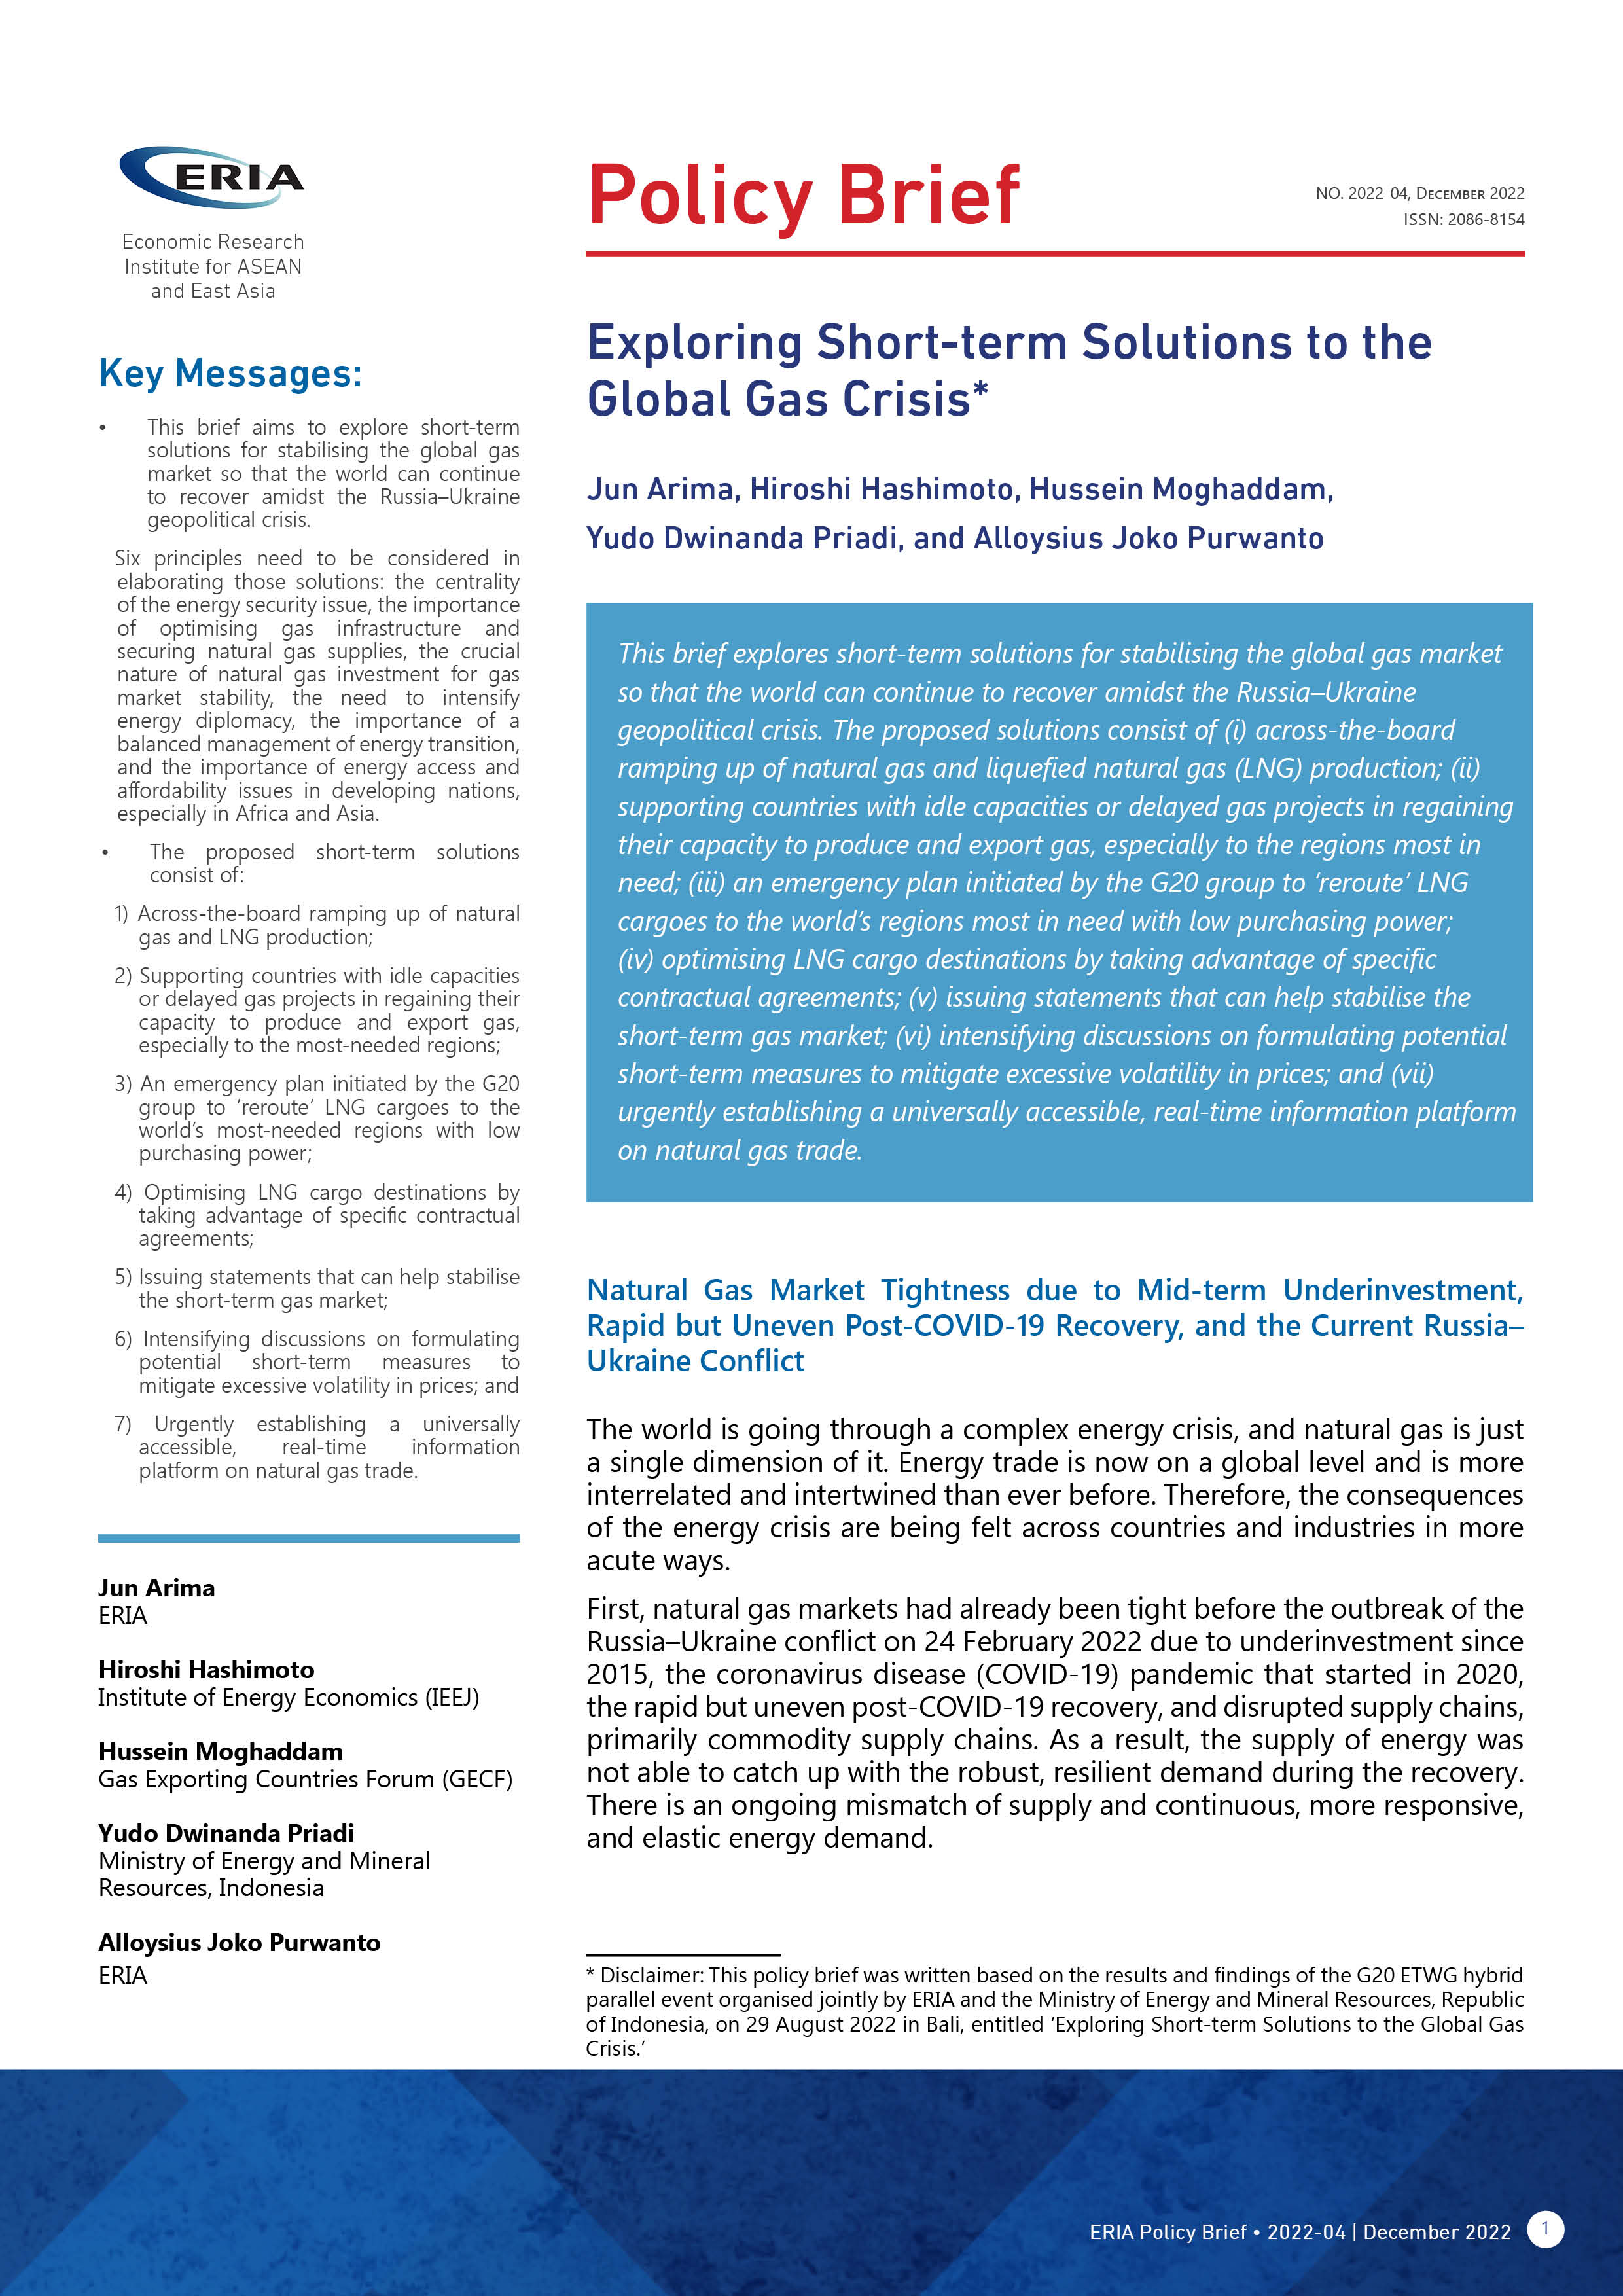 Exploring Short-term Solutions to the Global Gas Crisis